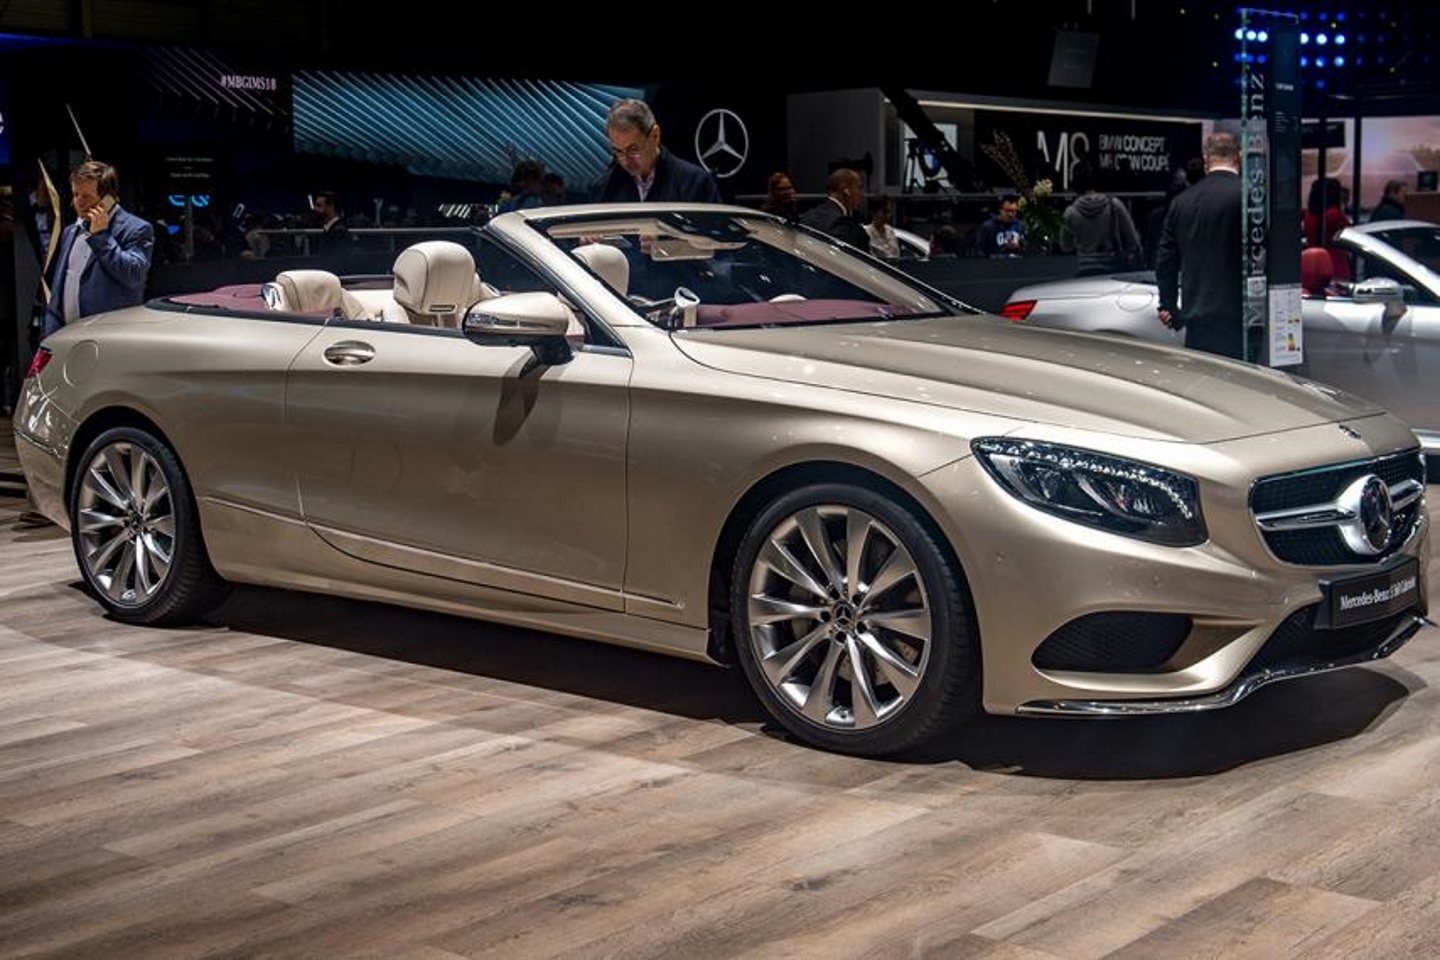 Mercedes Benz S 560 Cabriolet. Фото: Robert Hradil/Getty Images